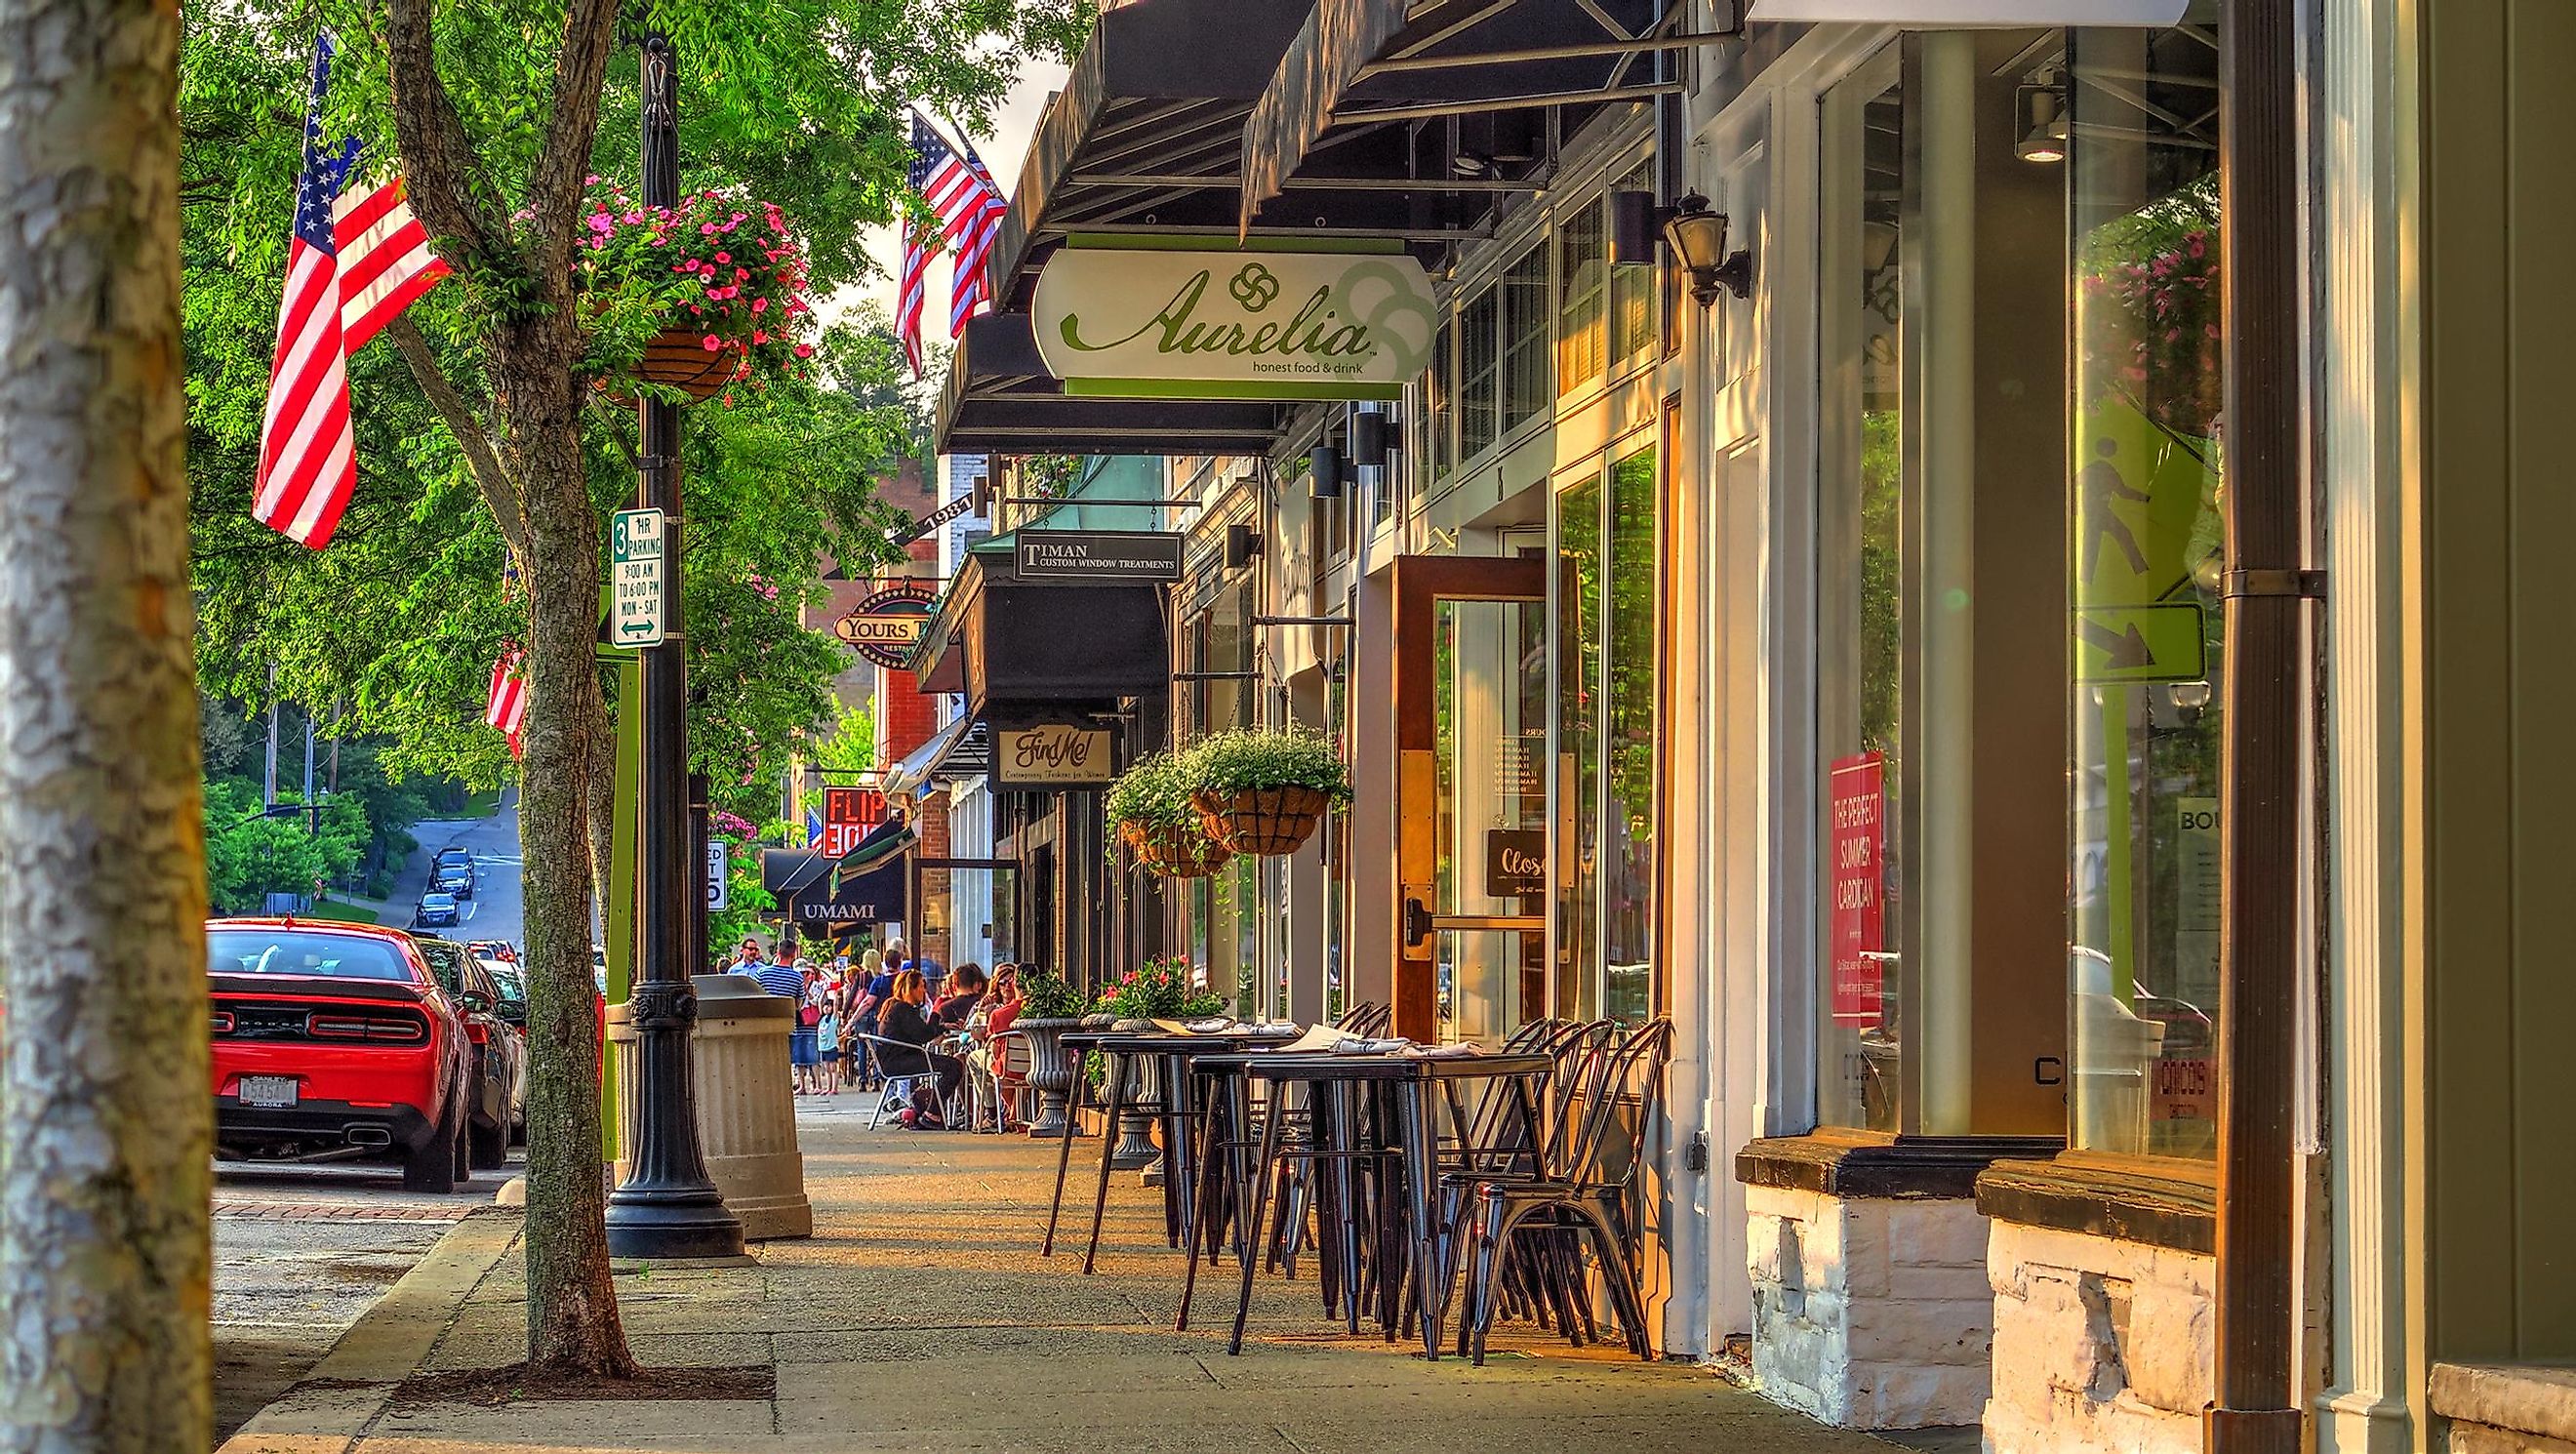 Chagrin Falls, Ohio / USA - May 31, 2019: Summer Late Afternoon Warm Sunny Scene of Sidewalk and Shops on Main Street in the Business District of Historical Downtown Chagrin Falls, Ohio. Editorial Credit: Lynne Neuman via Shutterstock.